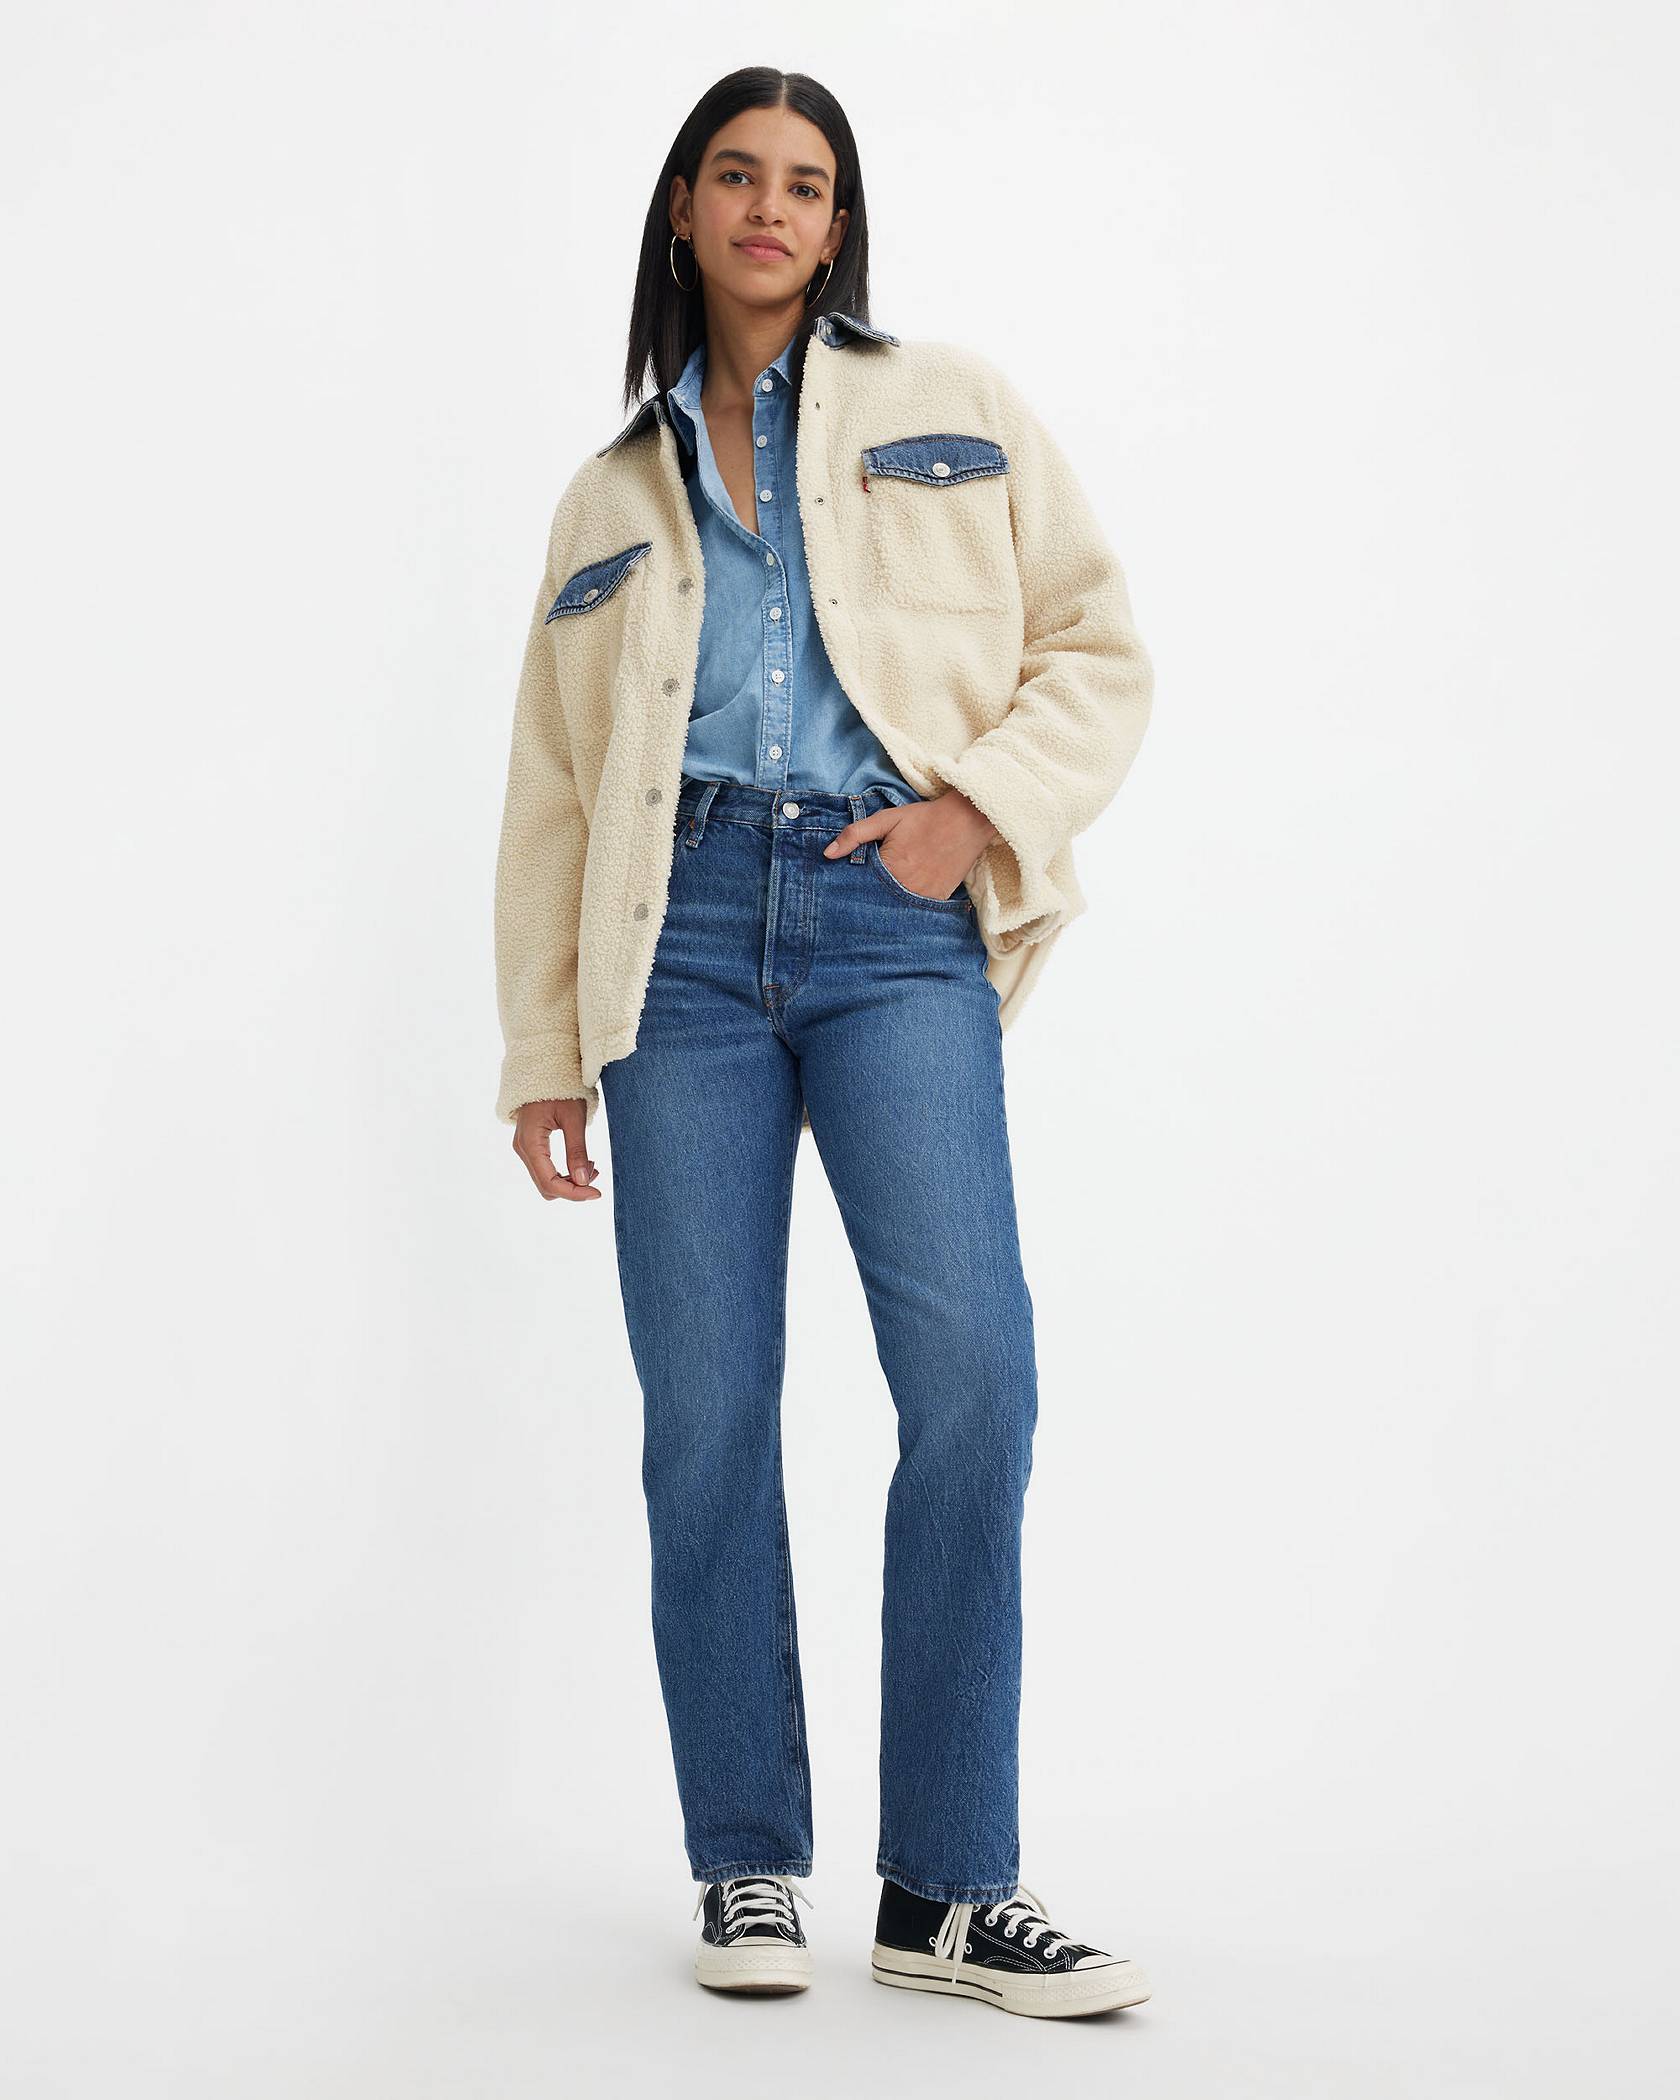 Levi's® Jeans, Jackets & Clothing | Levi's® Canada Official Site